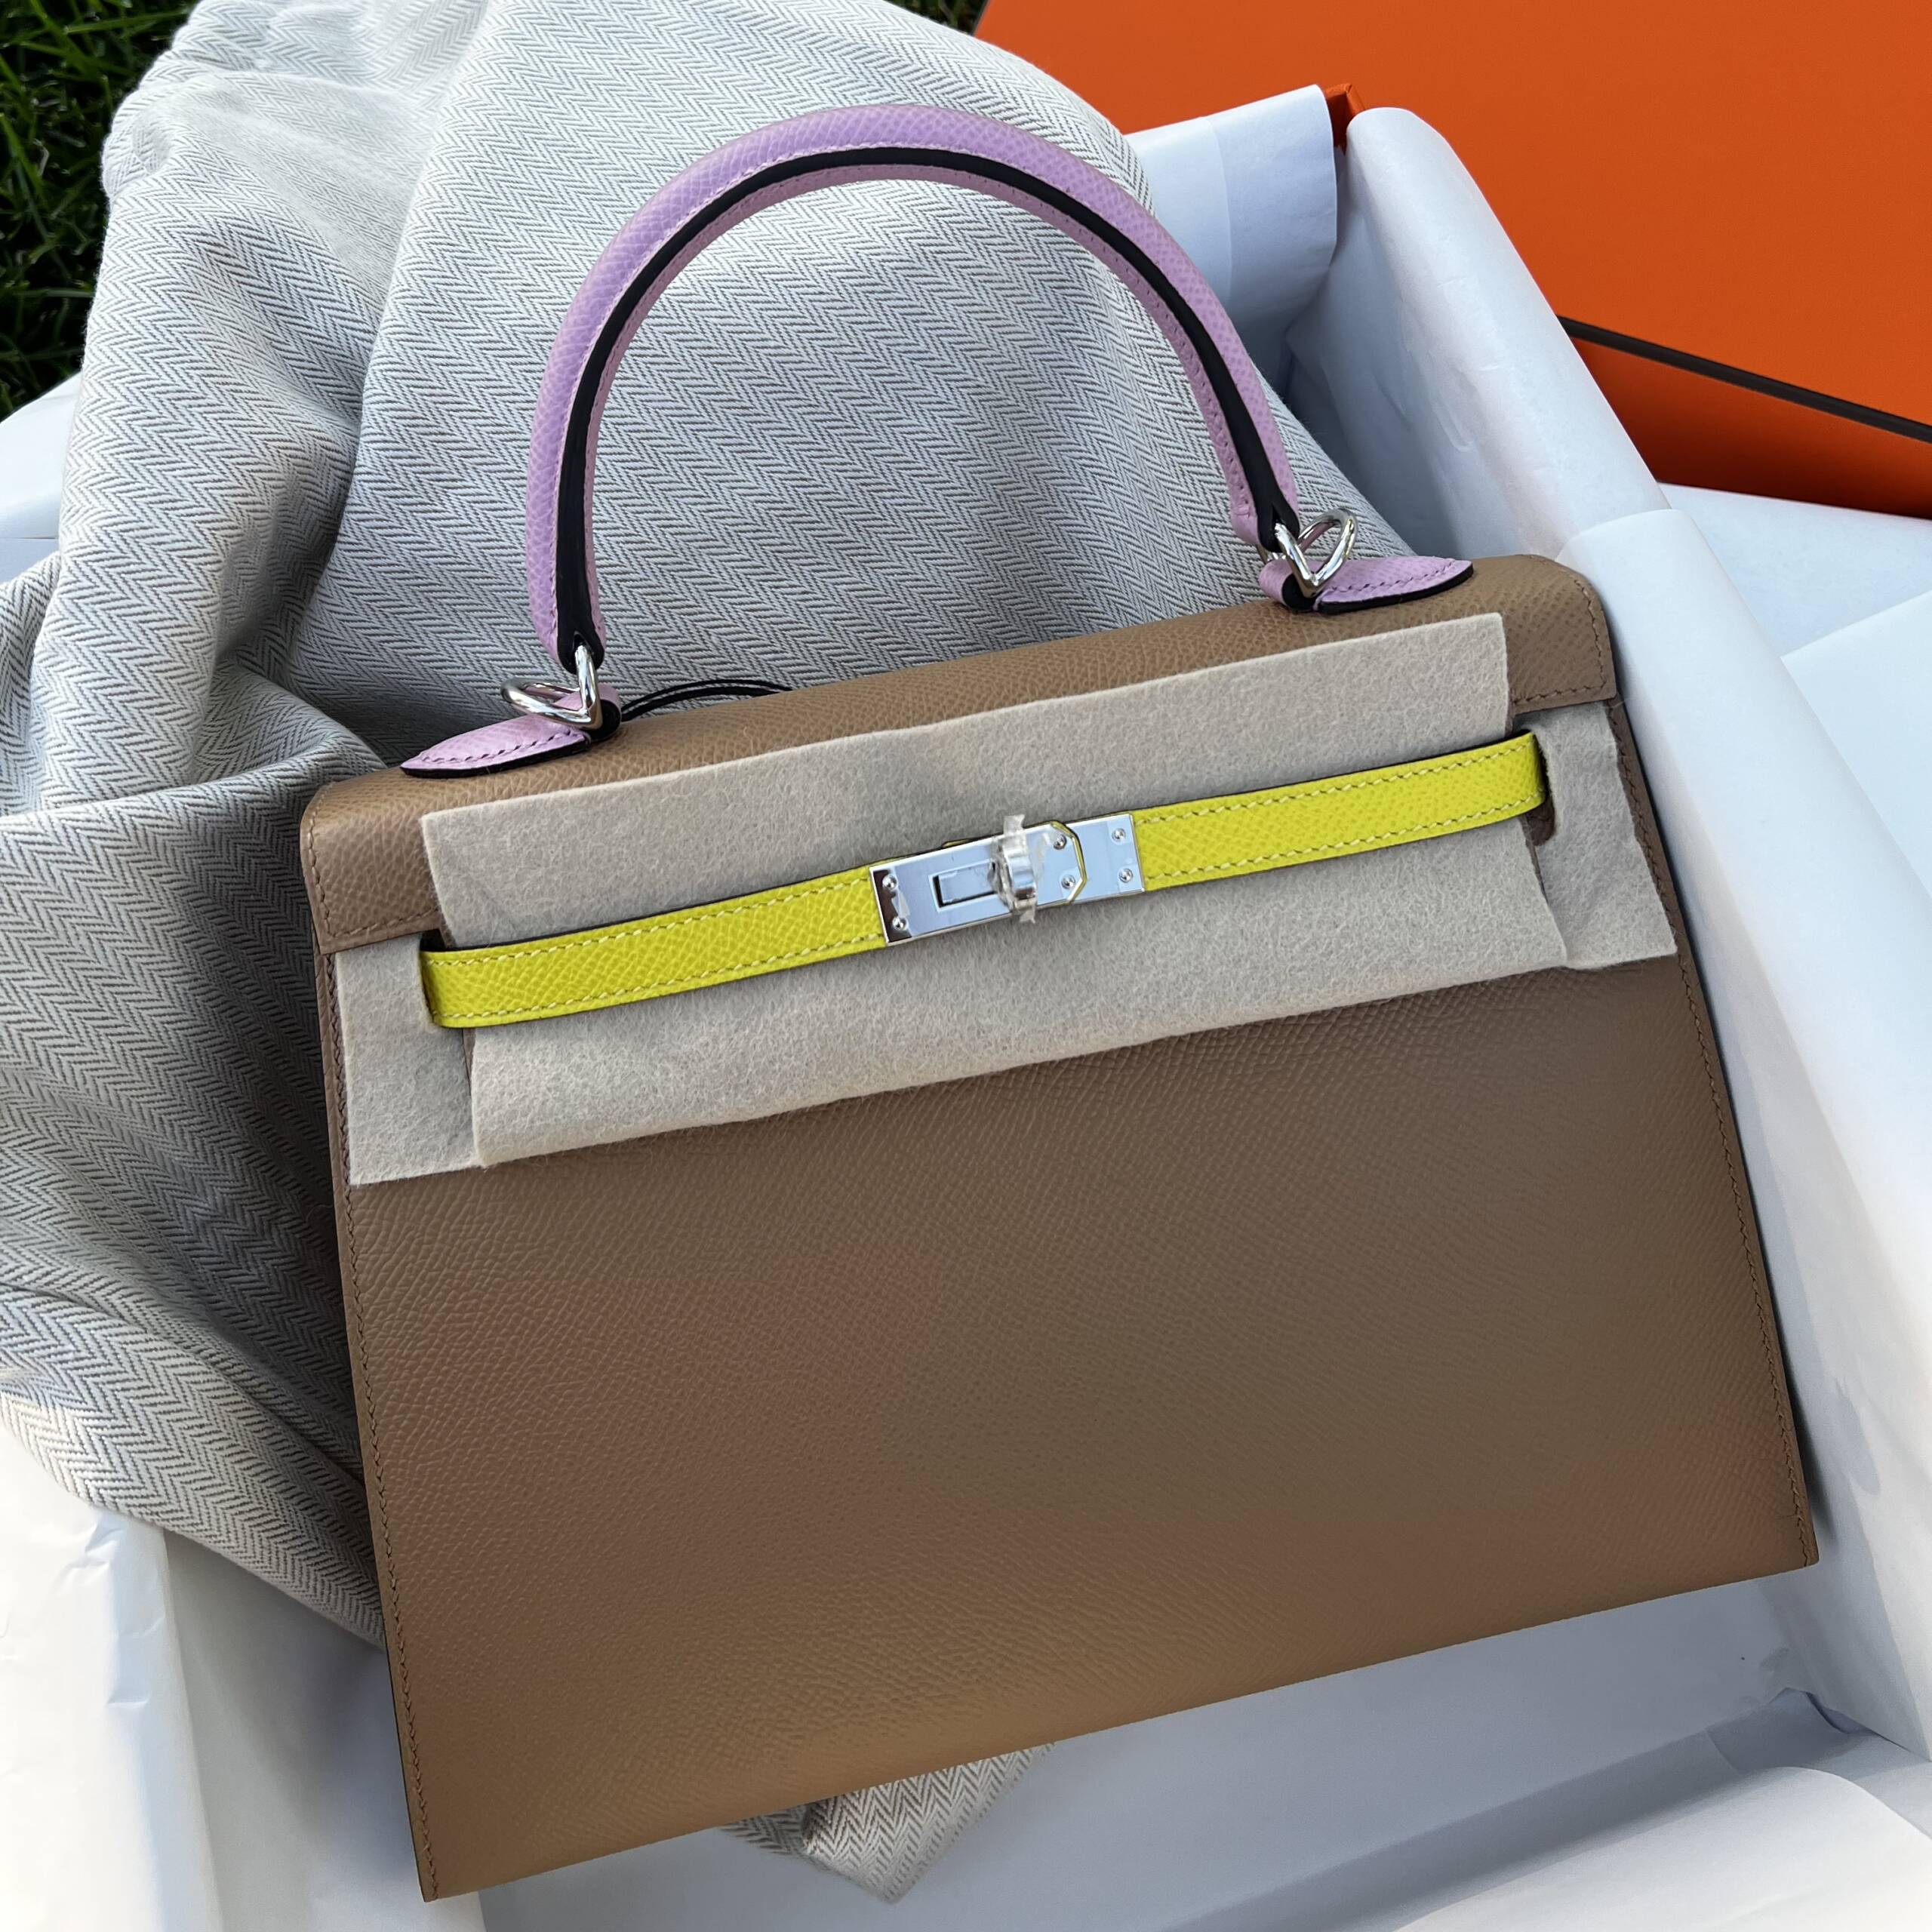 My first Hermes bag unboxing! Excited! Got the new colour Gris Meyer.